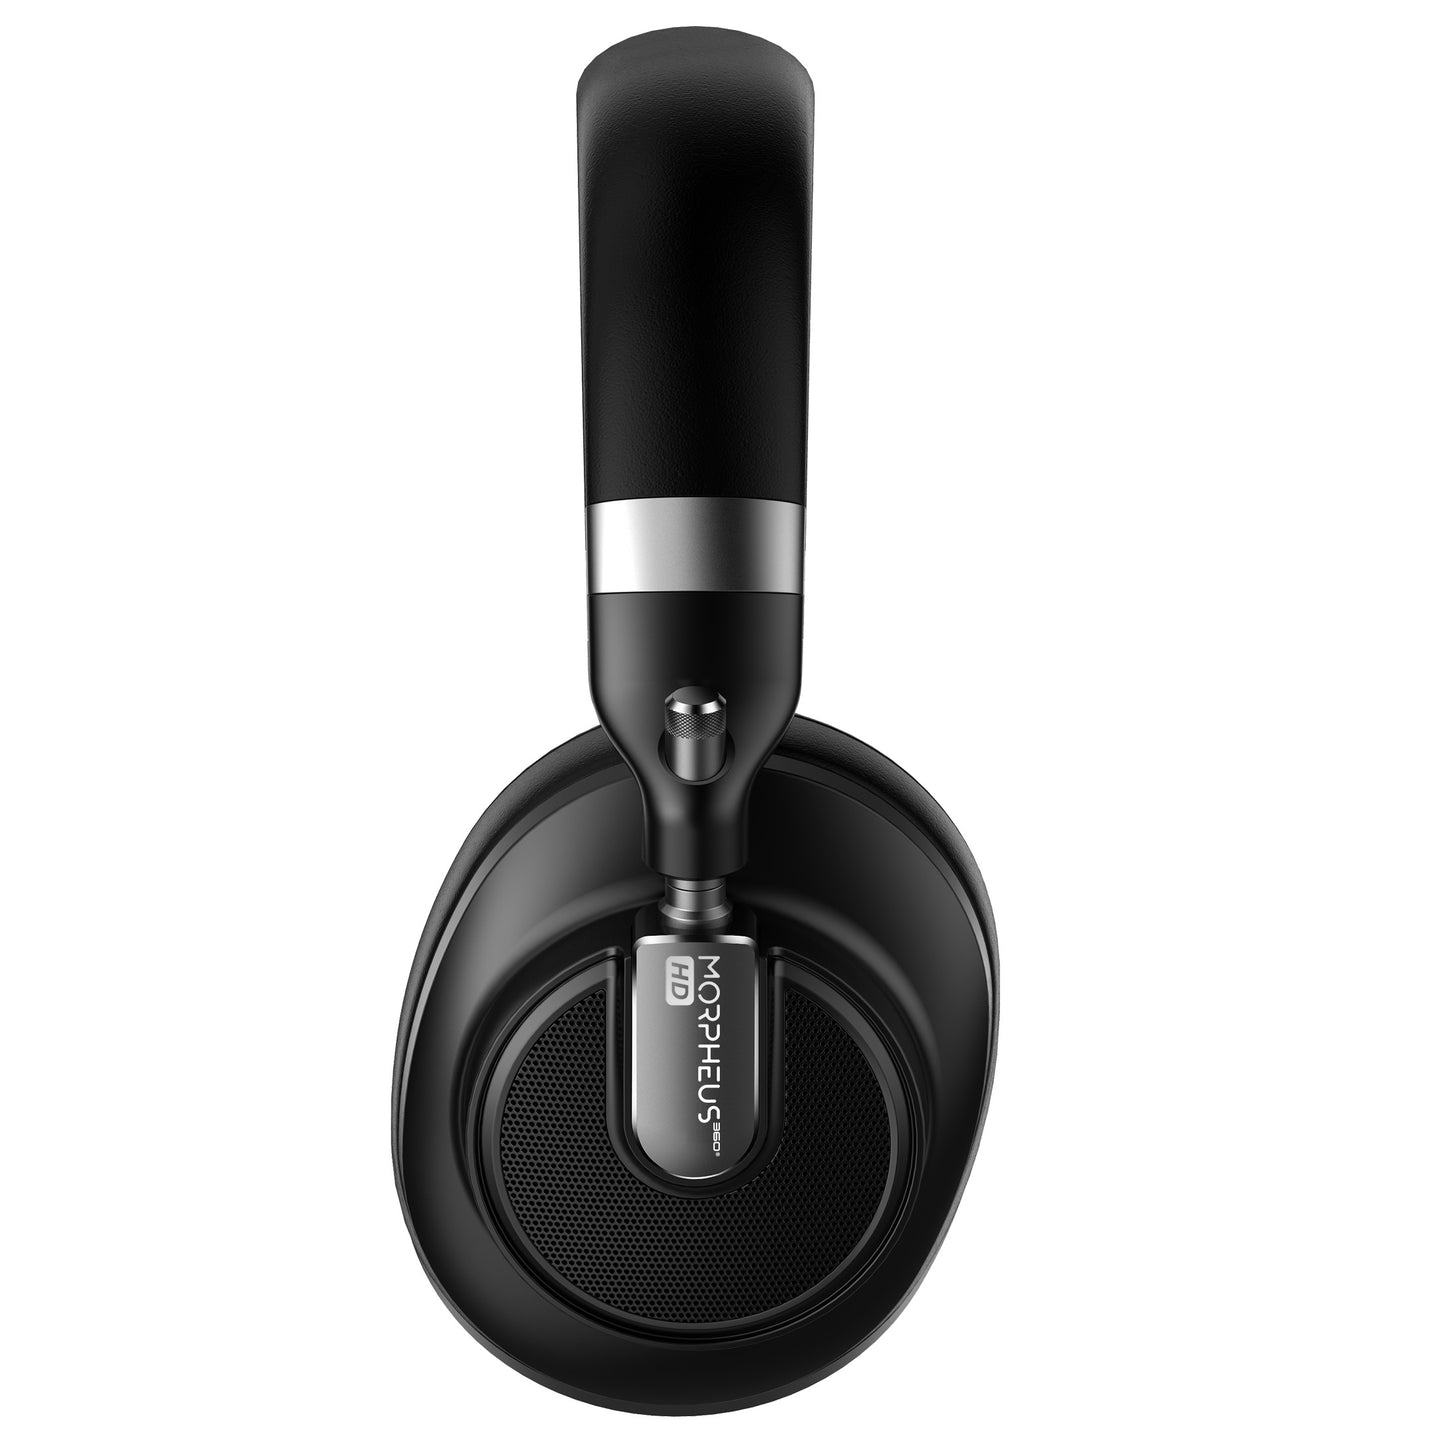 Retail Package of the Morpheus 360 Verve HD Hybrid ANC Wireless Noise Cancelling Headphones HP9750HD, in a Retail Package showing the  Features and Benefits of the product.  Qualcomm aptX HD Sound, Kalimba DSP, Bluetooth 5.1, Travel Case Included.